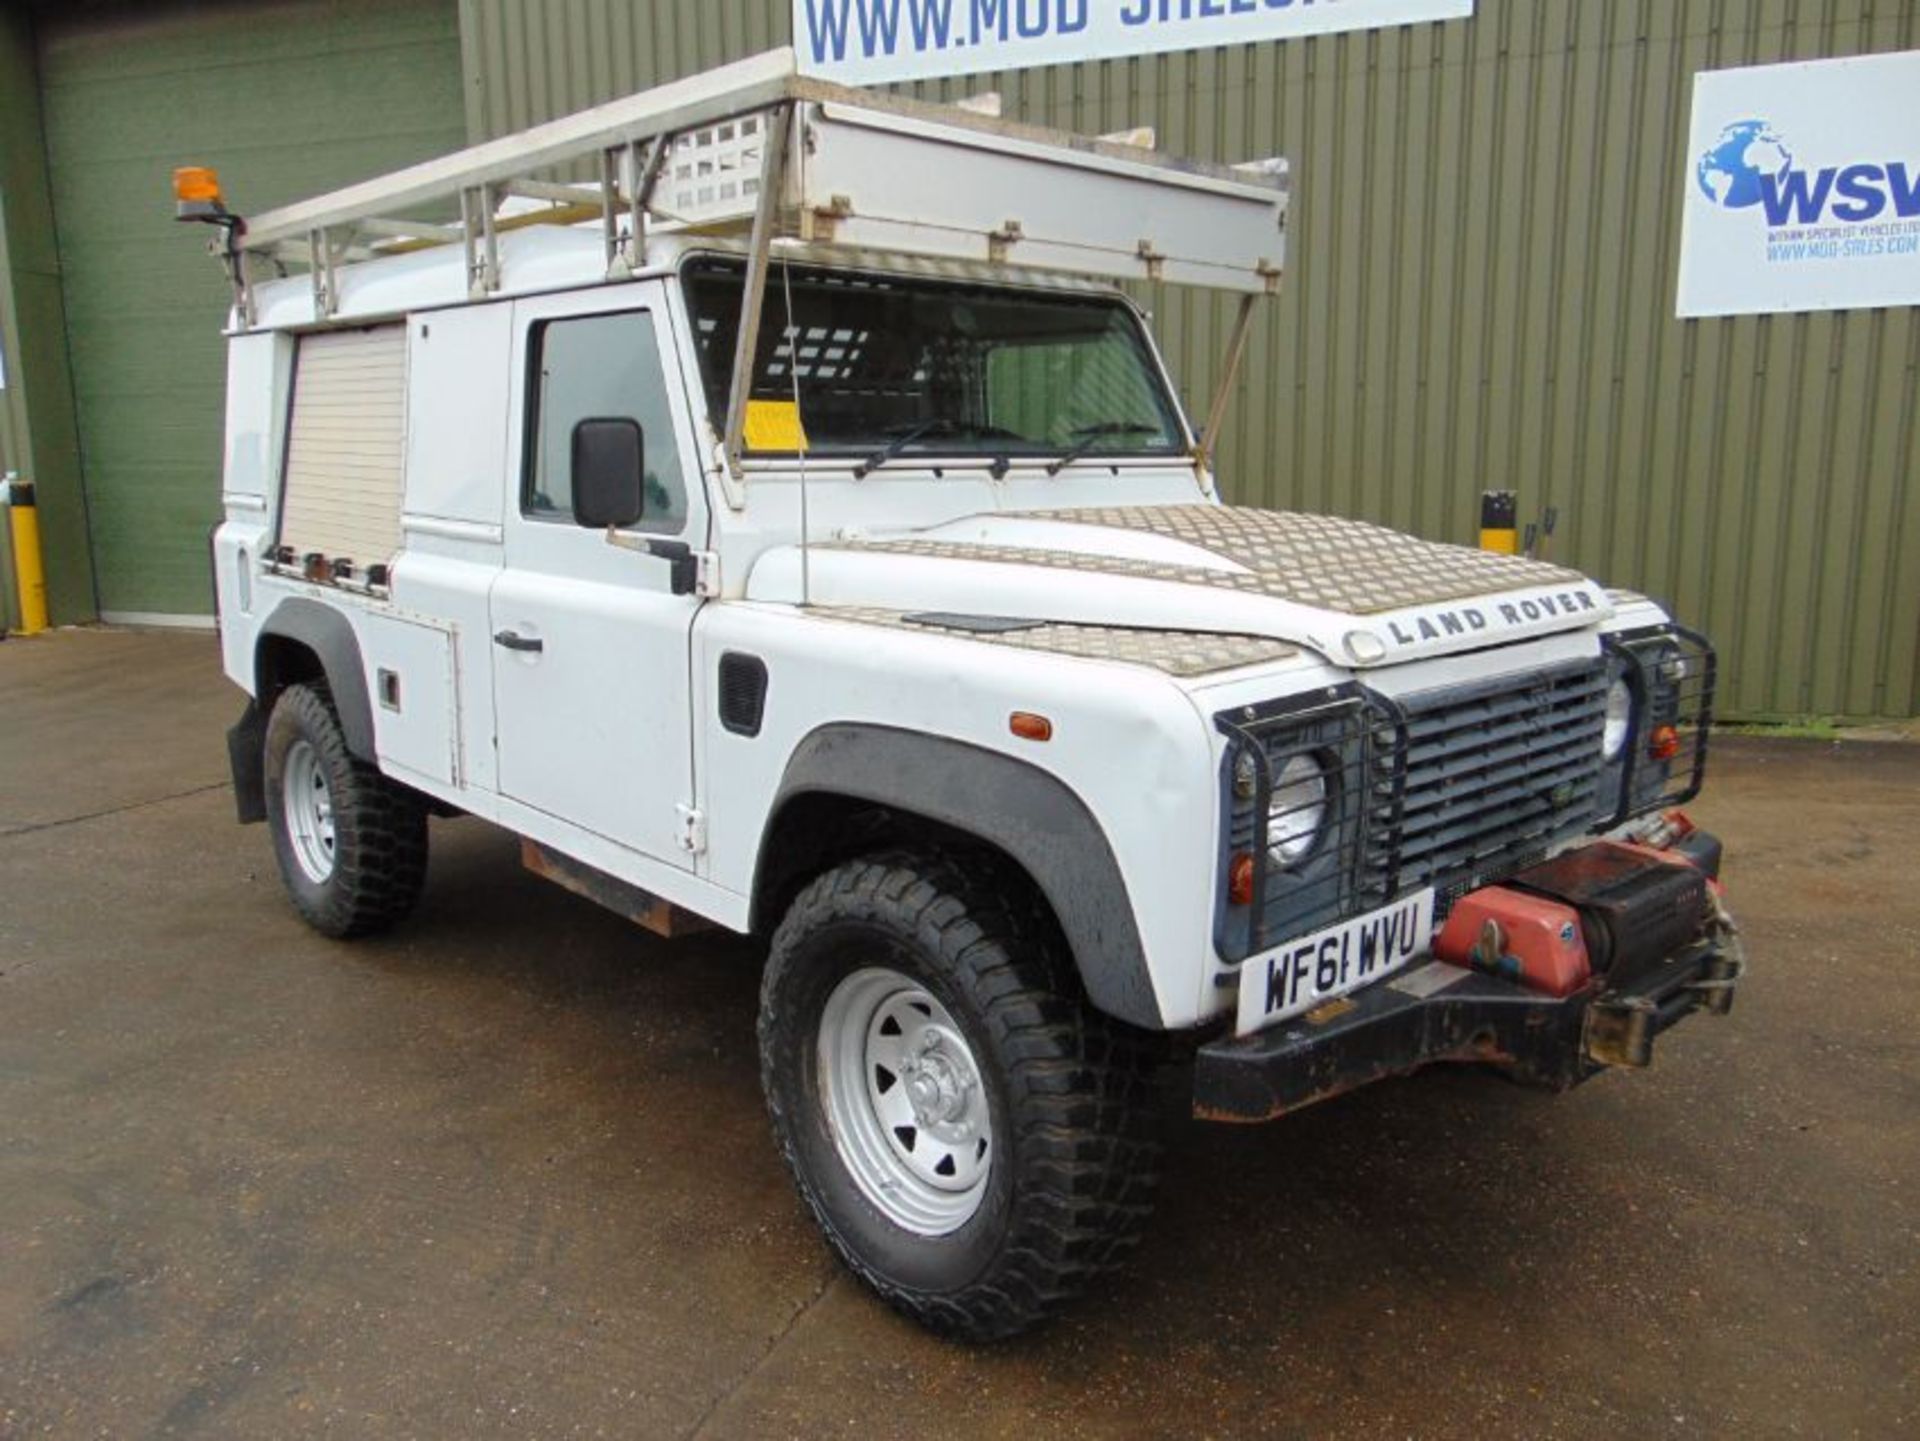 2011 Land Rover Defender 110 Puma hardtop 4x4 mobile workshop with Winch Etc. From UK Utility Co.